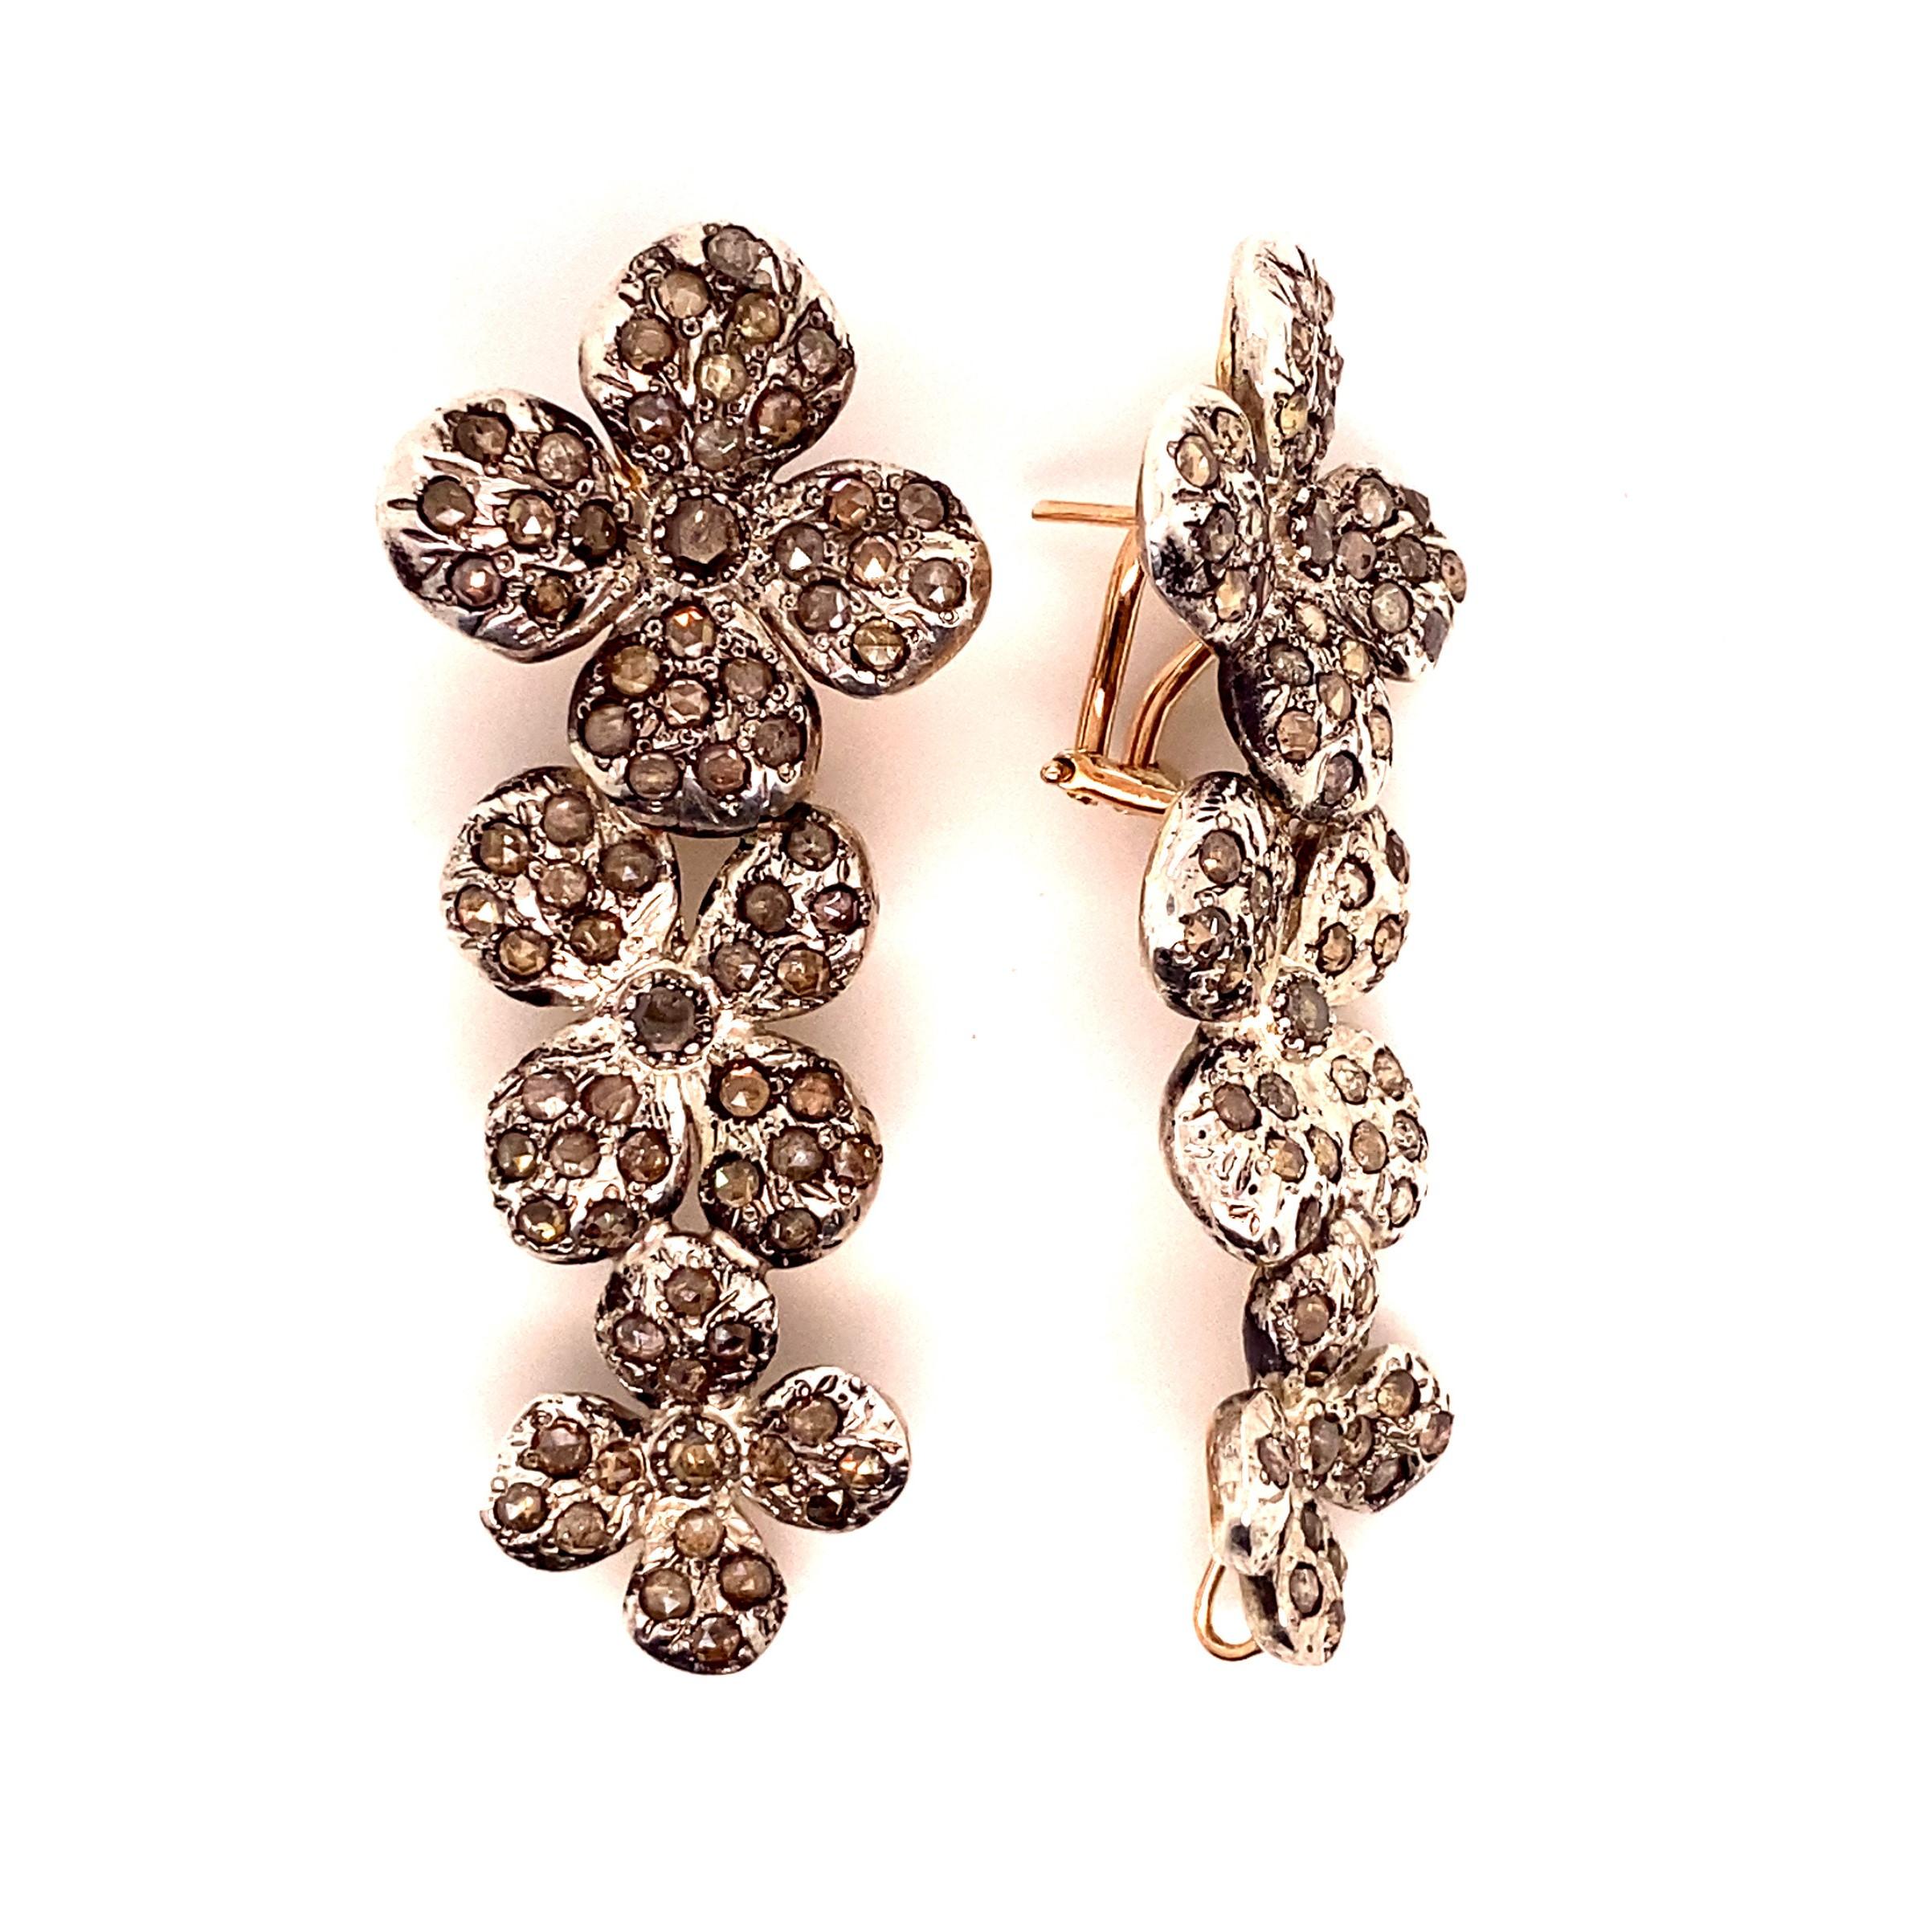 These drop earrings, masterfully created by hand from 9-karat rose gold and 925 silver are each set with a handful of carefully selected rose-cut white diamonds. 

The flowers' central diamonds weigh .70 carats, and the combination of the rest of